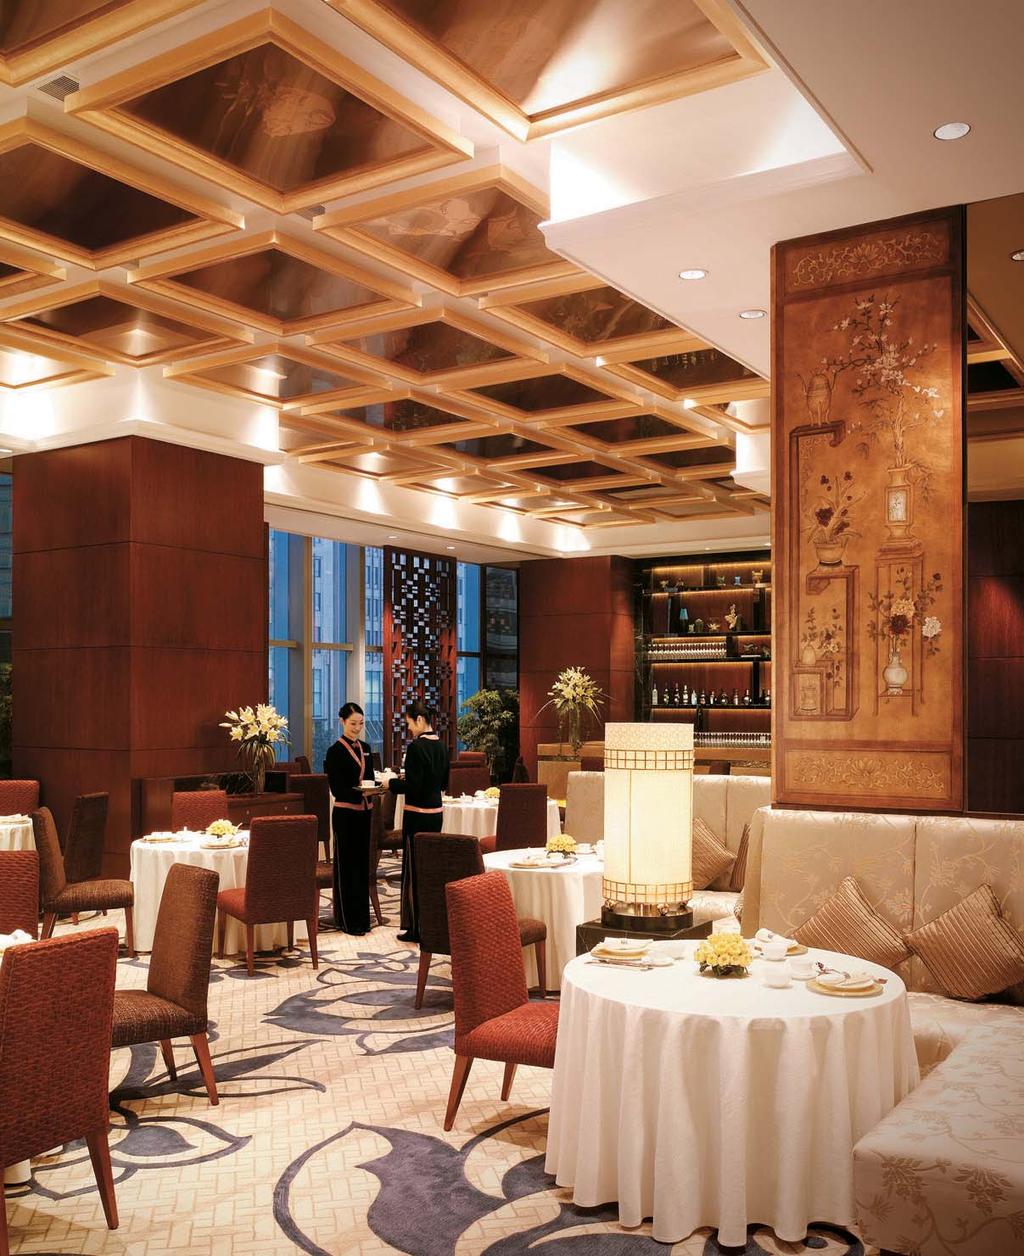 in the cosiness of fook lam moon s private dining room, the golden glow from the chandeliers above softened our faces.